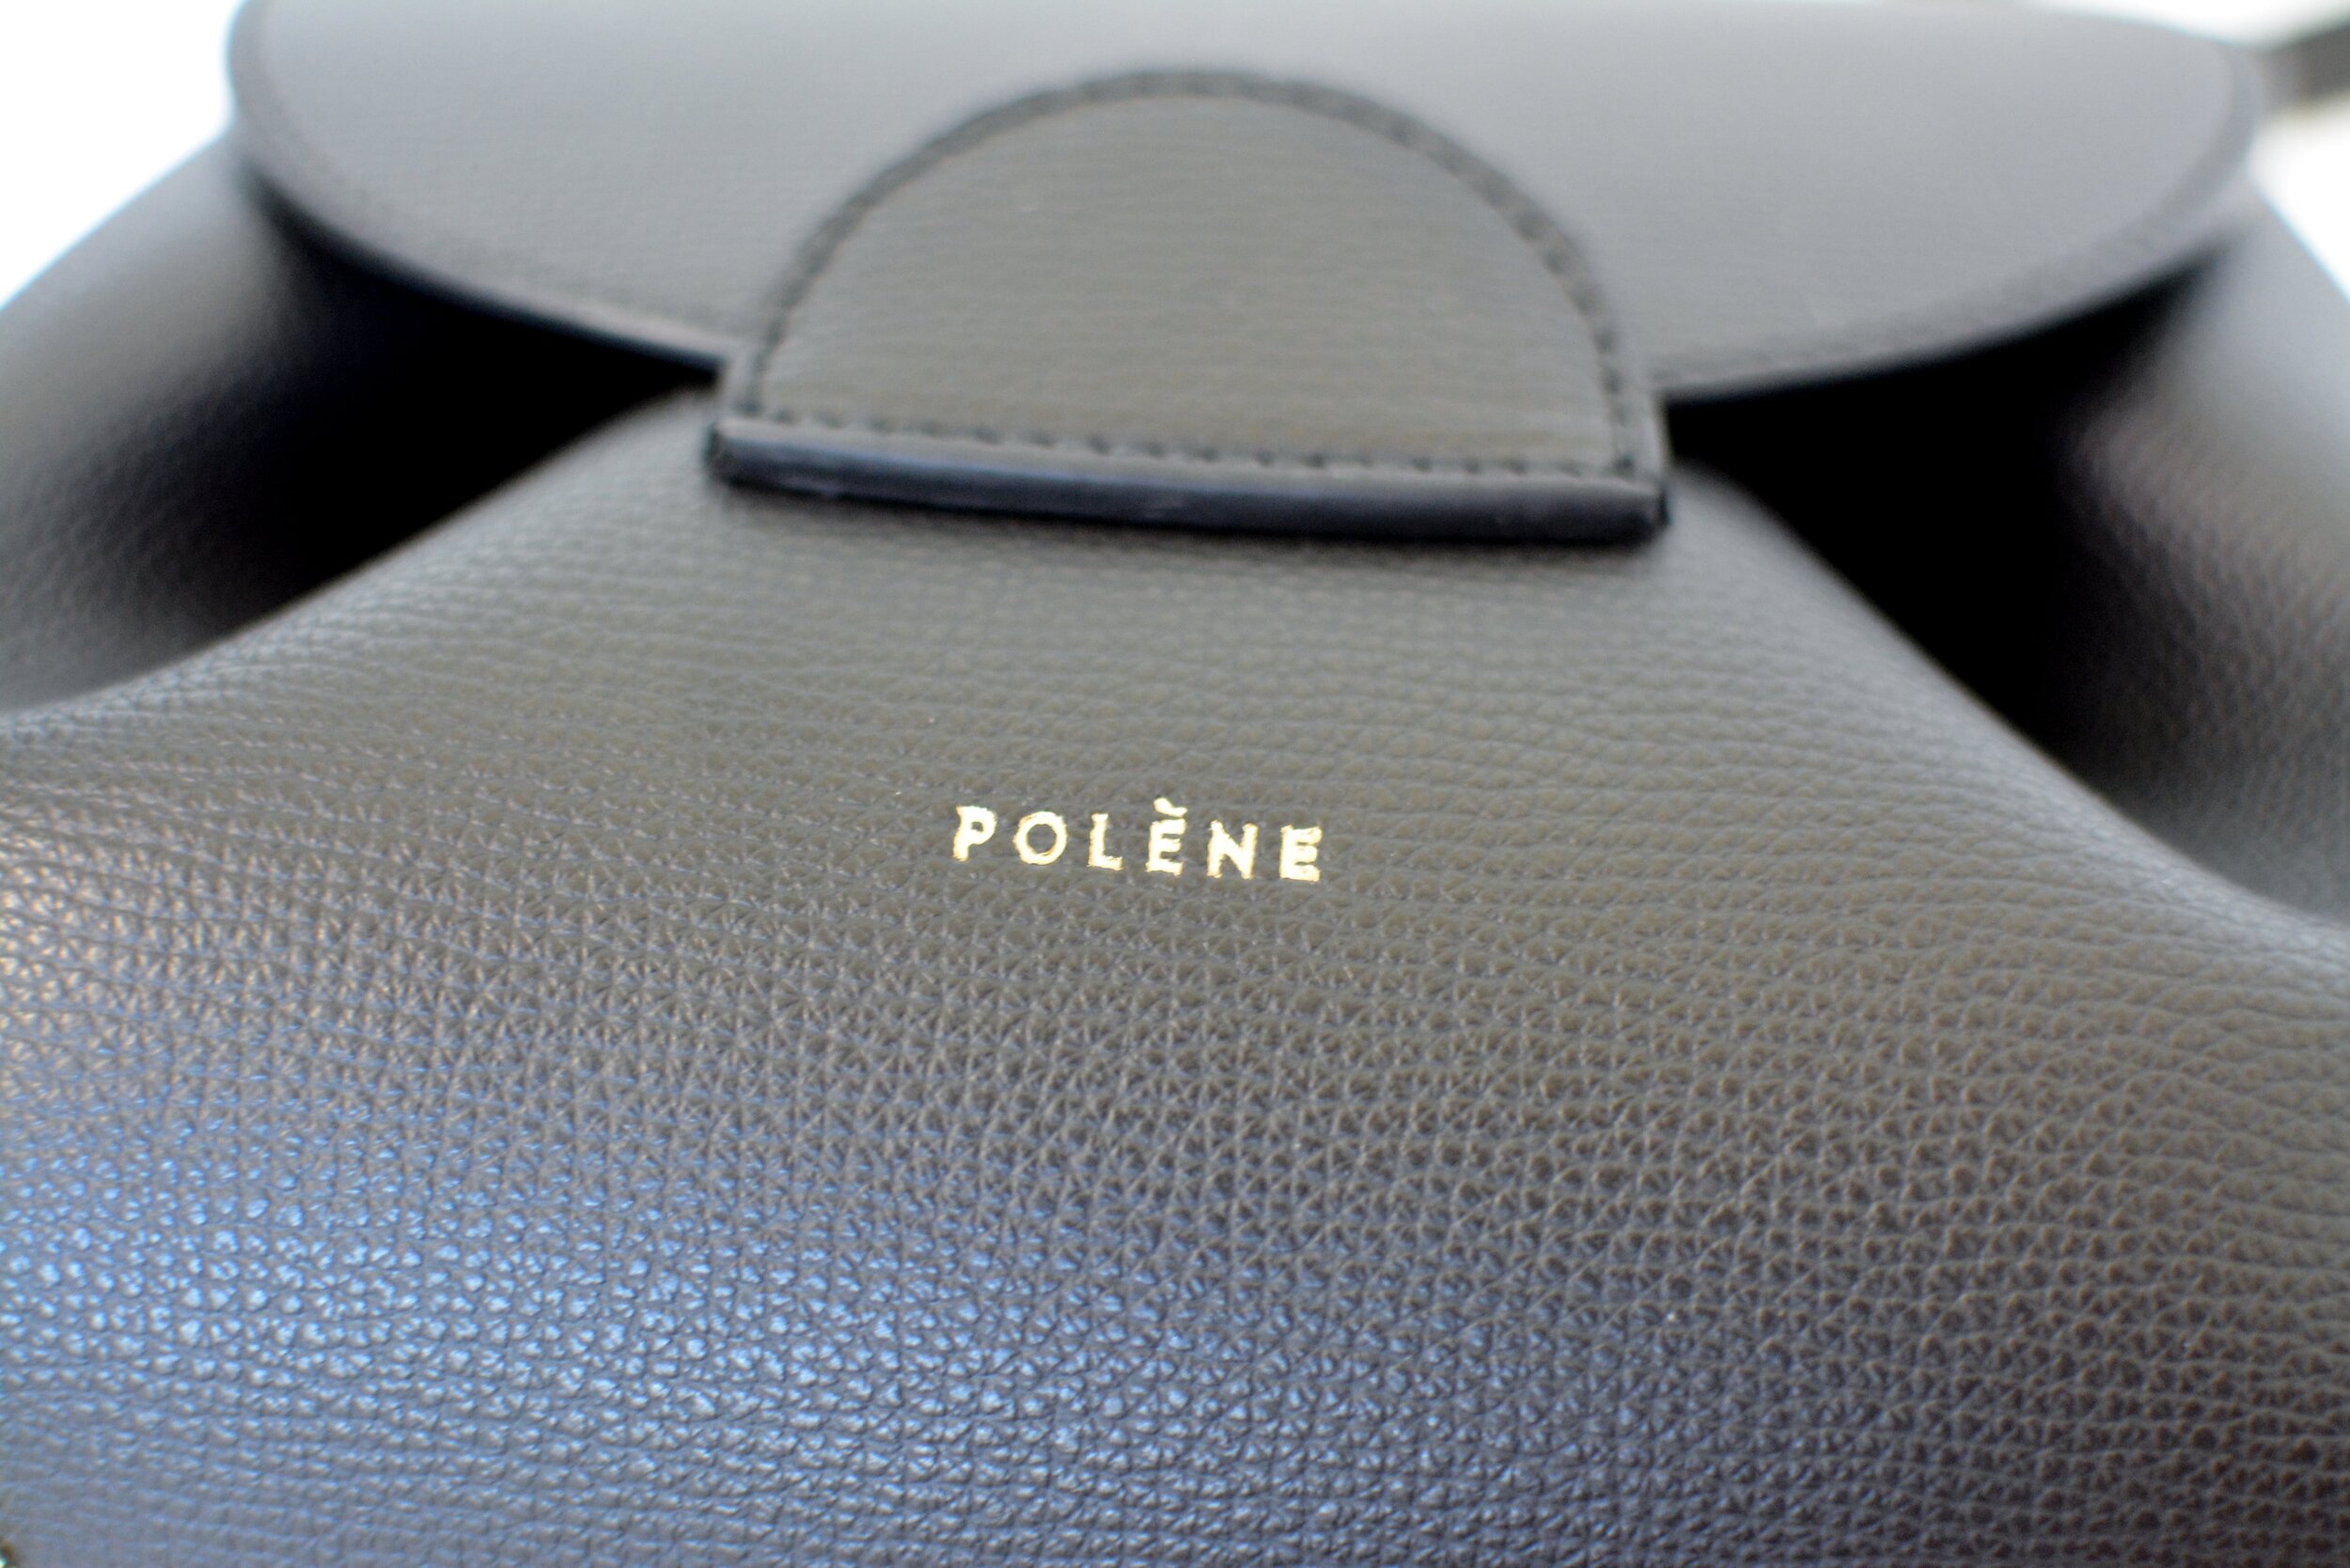 Unsponsored Polene Numero Un Nano Bag Review {Updated July 2020} — Temporary-House Wifey